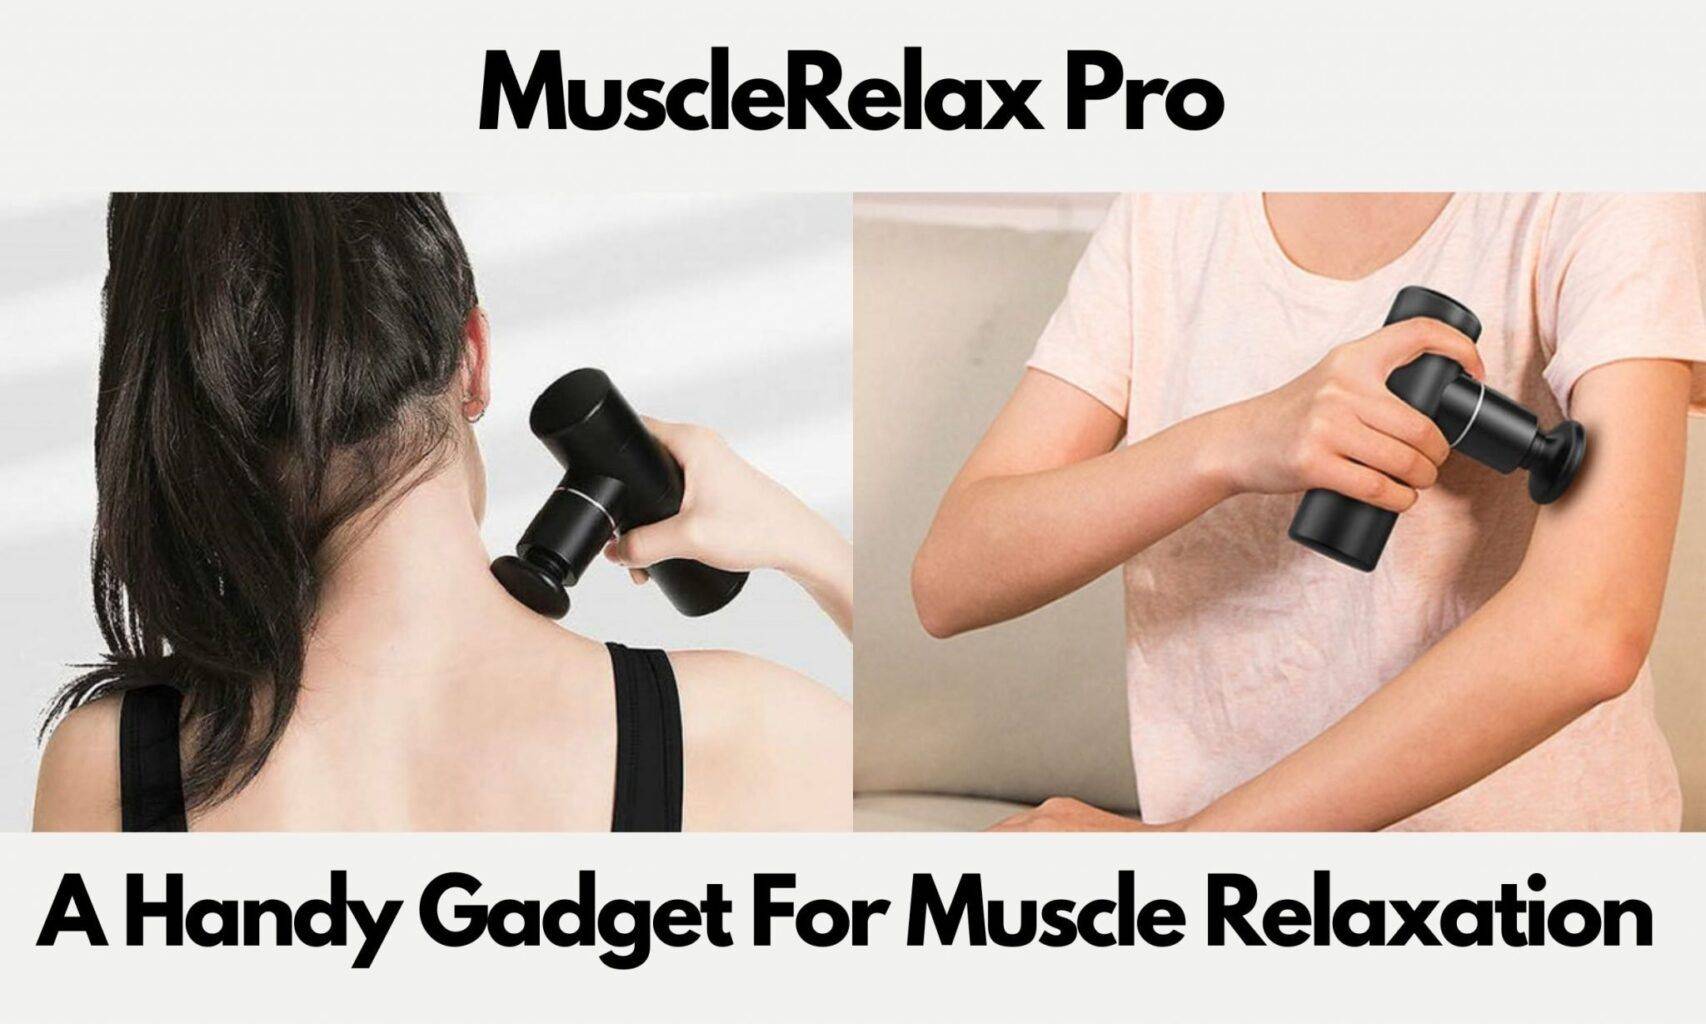 Muscle Relax Pro – Handy Gadget For Muscles